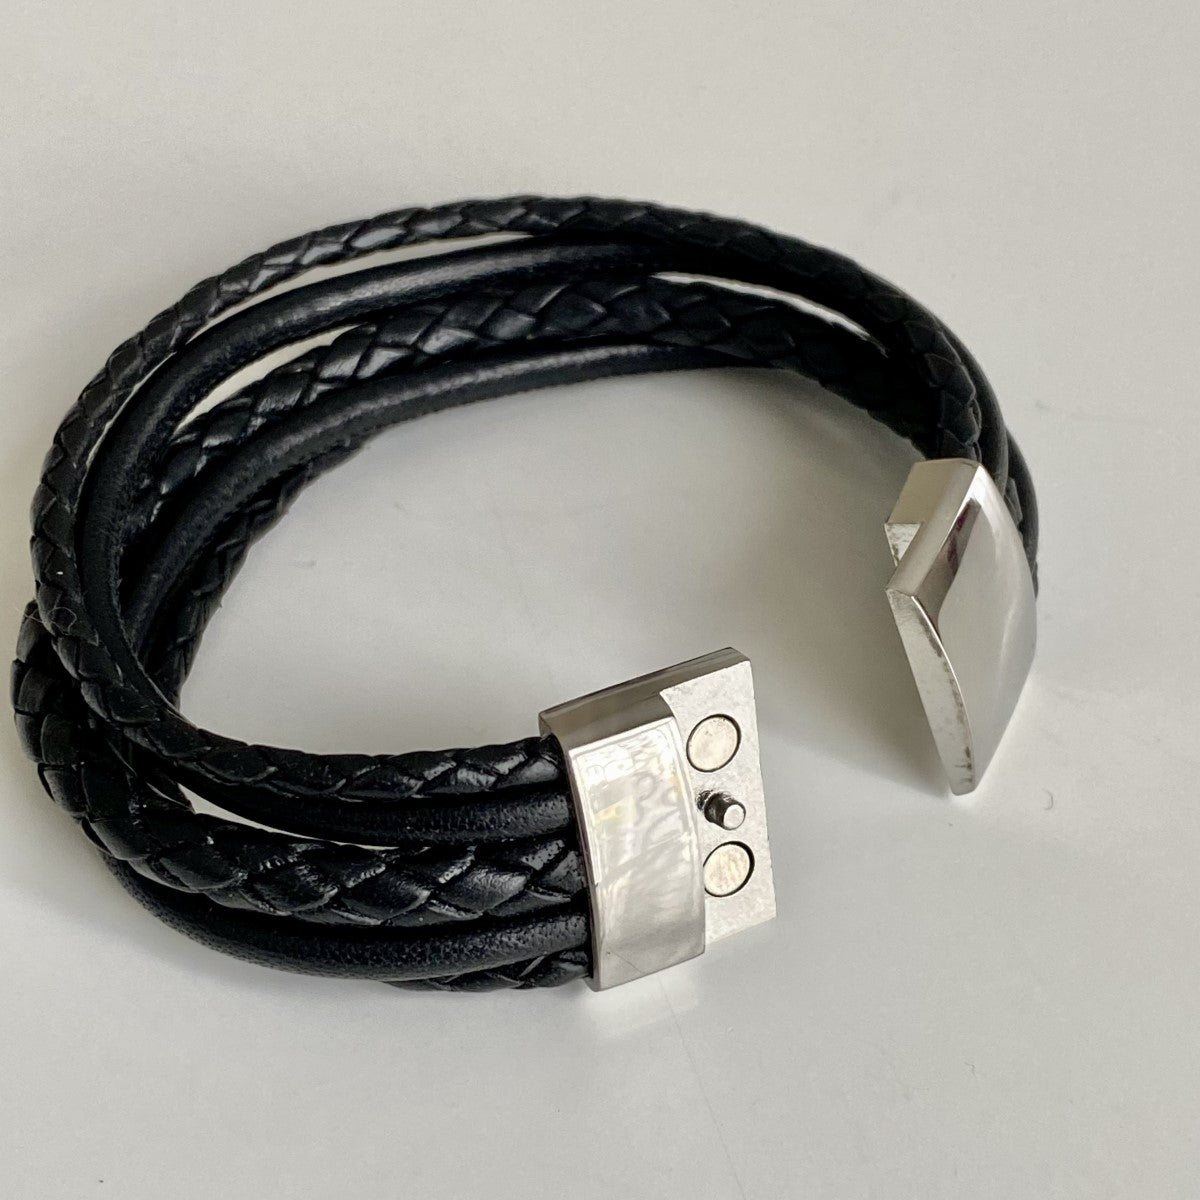 Black Nappa Leather Men's 5 Band Bracelet with a Magnetic Stainless Steel Clasp